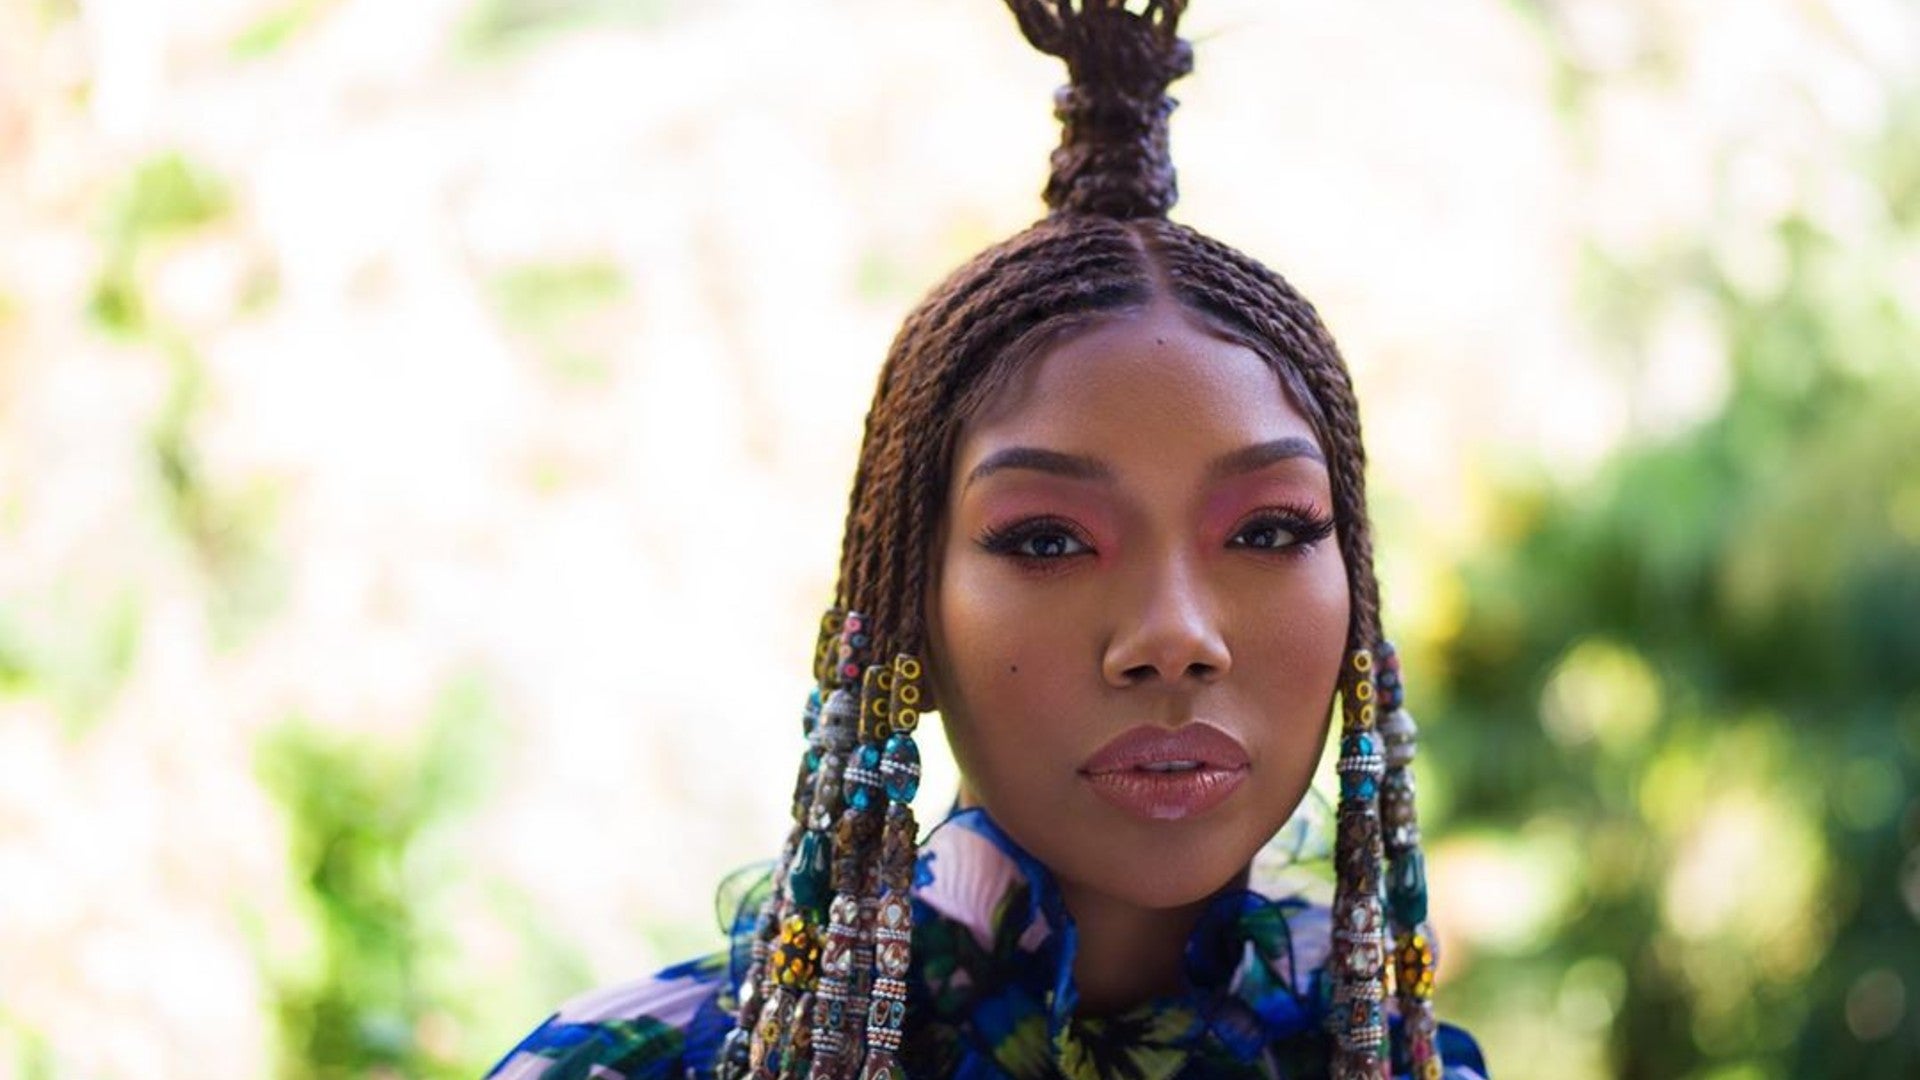 Brandy, China McClain, Yung Miami And Other Celebrity Beauty Looks Of The Week